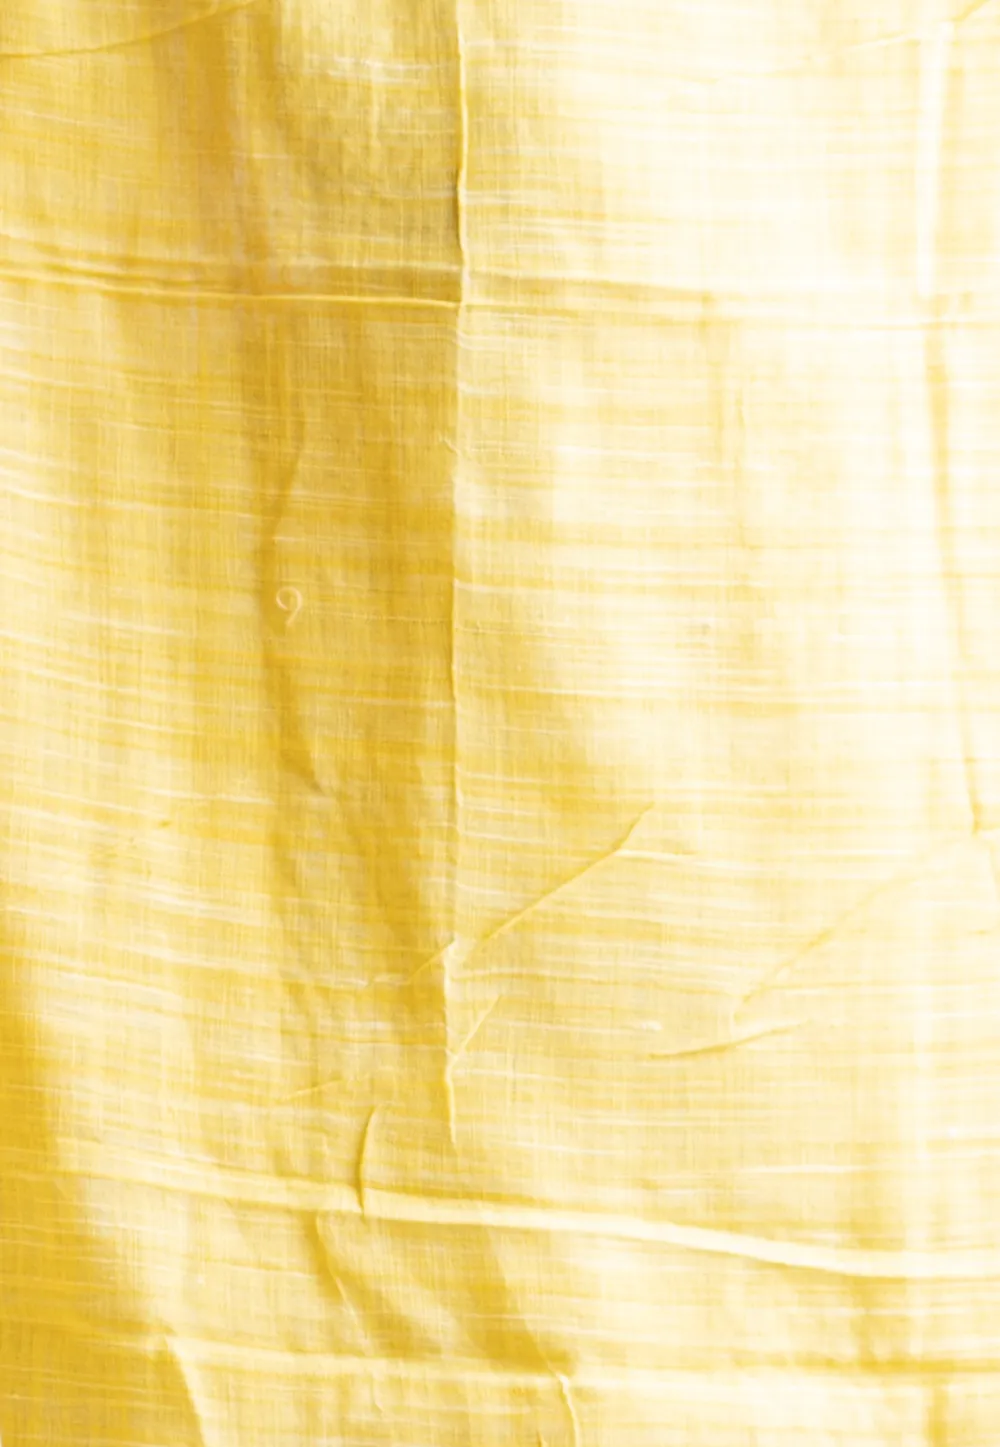 offwhite handloom saree with contrasting border yellow motifs 6023ca046b002 1612958212